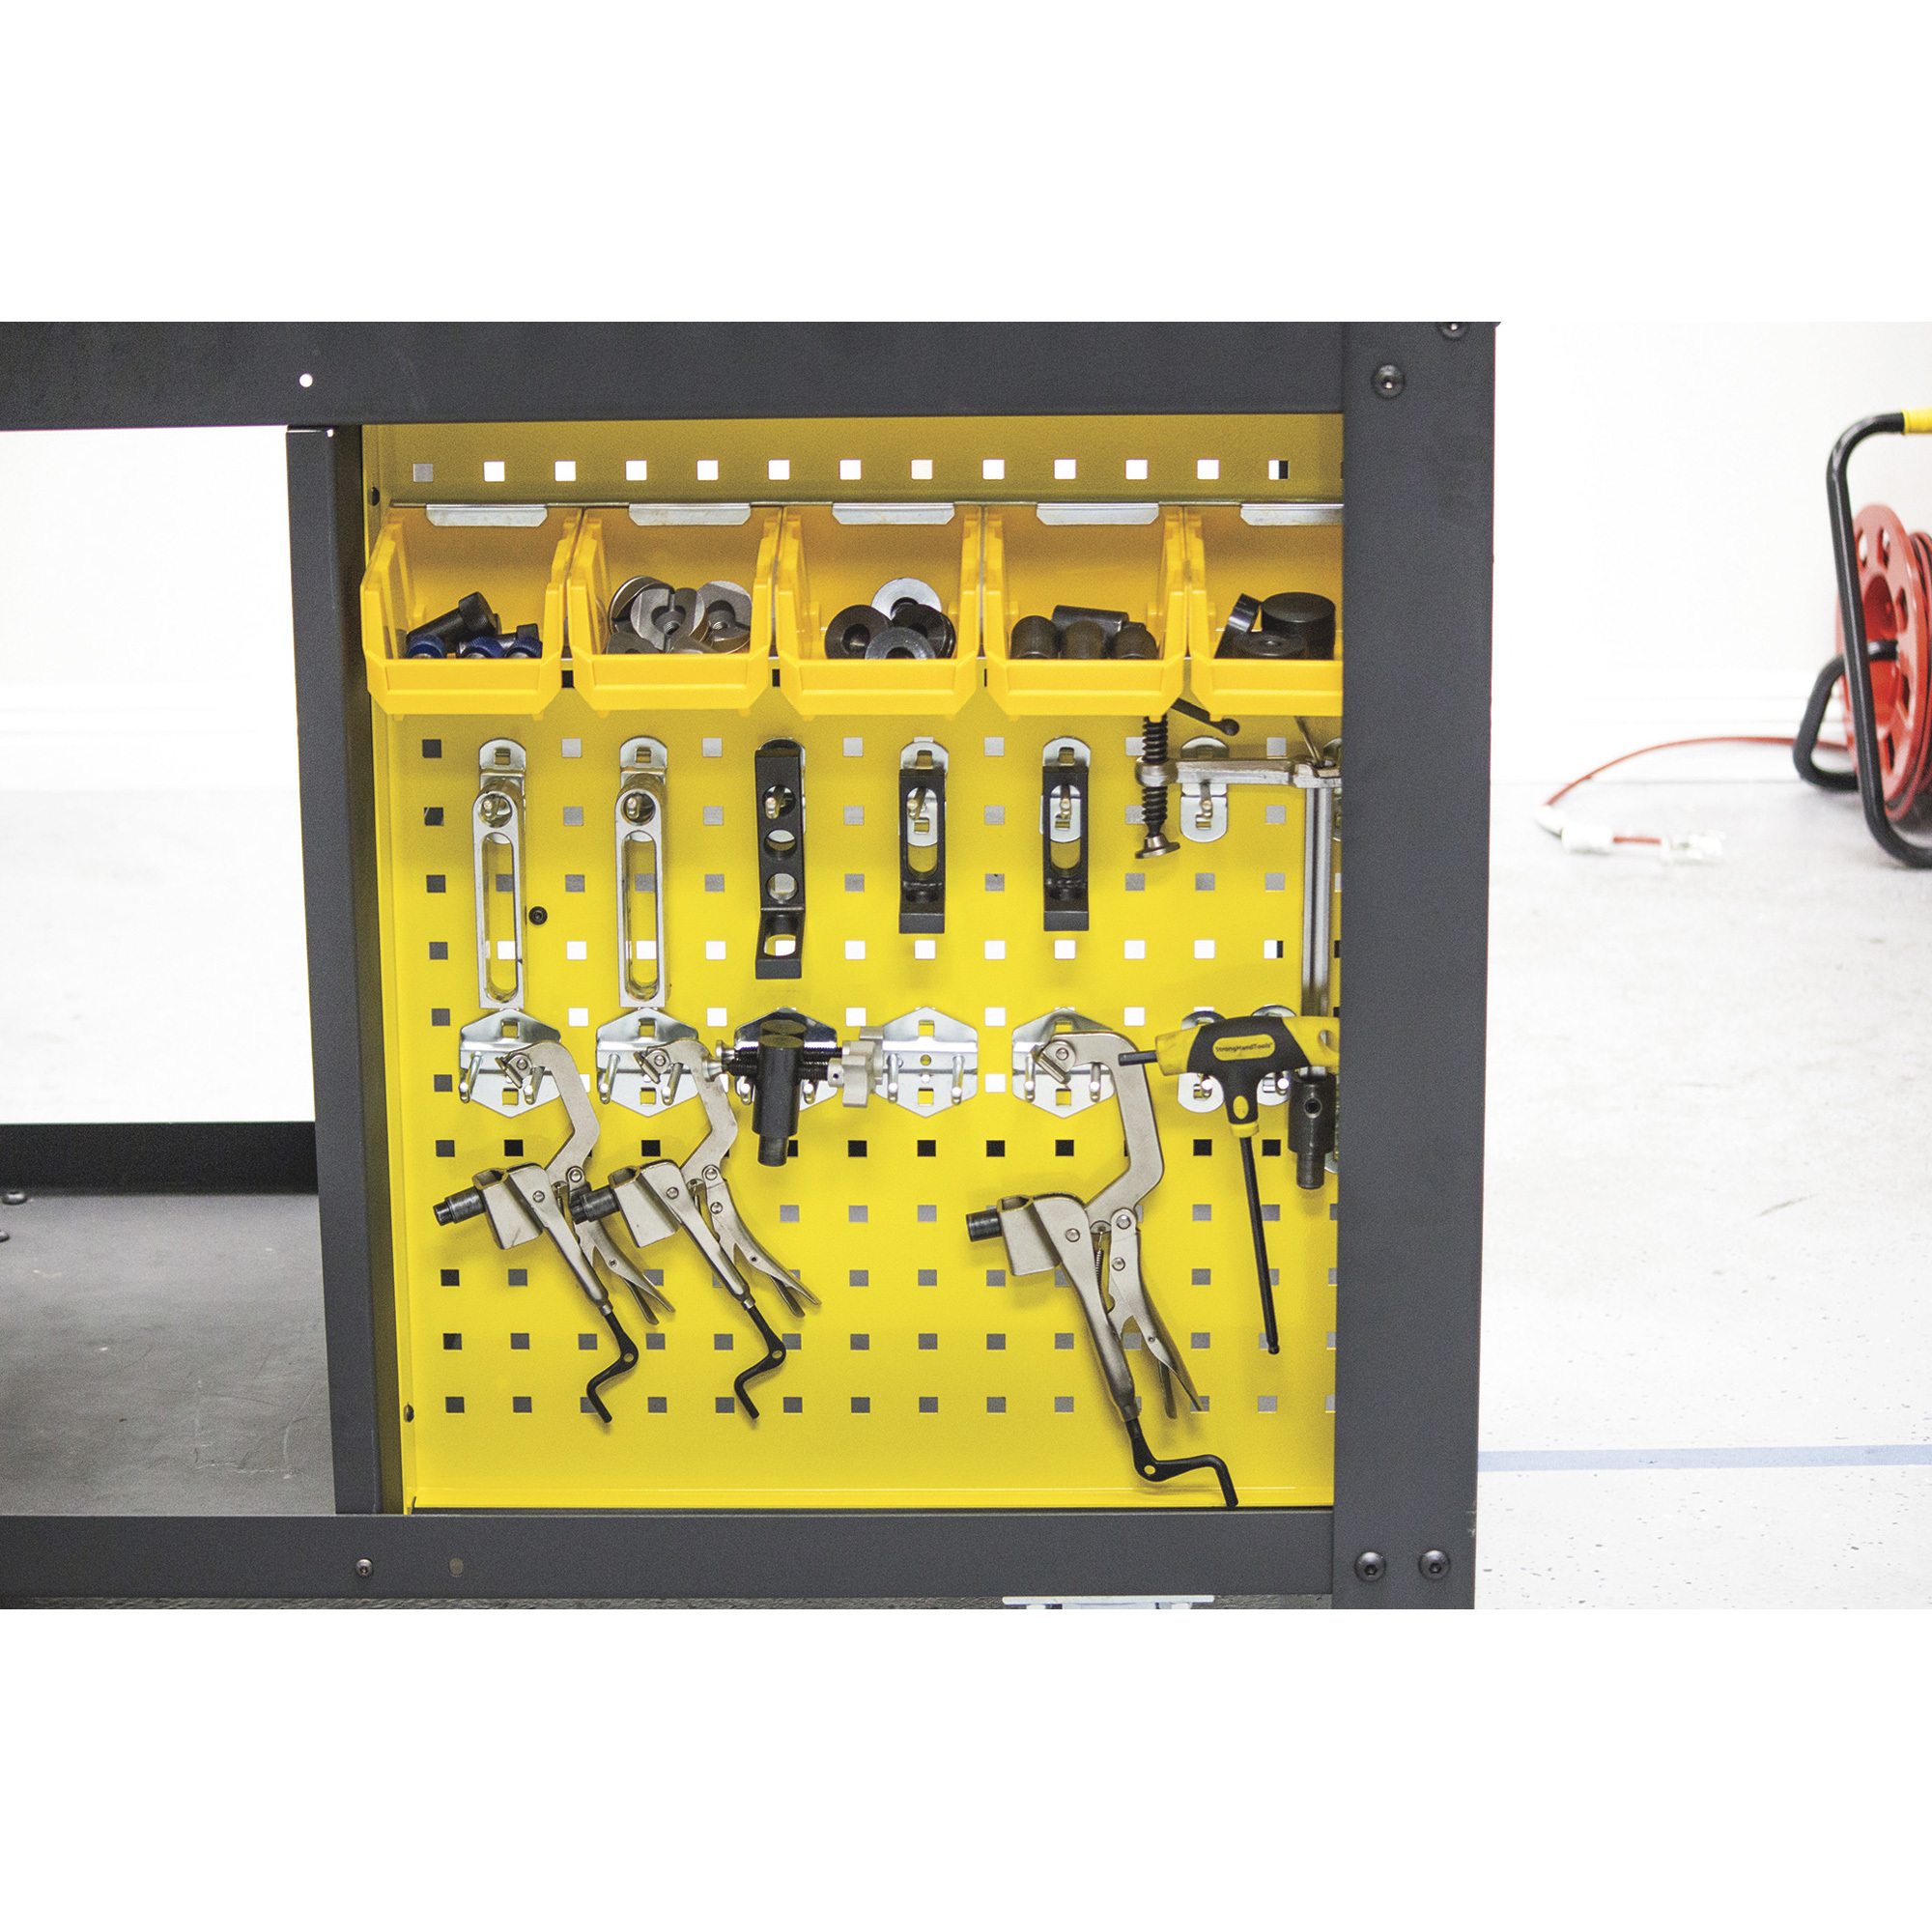 Rhino Cart Mobile Fixturing Welding Station with Fixture Kit, 66-Pcs.,  Model# TD5-4830Q-K1